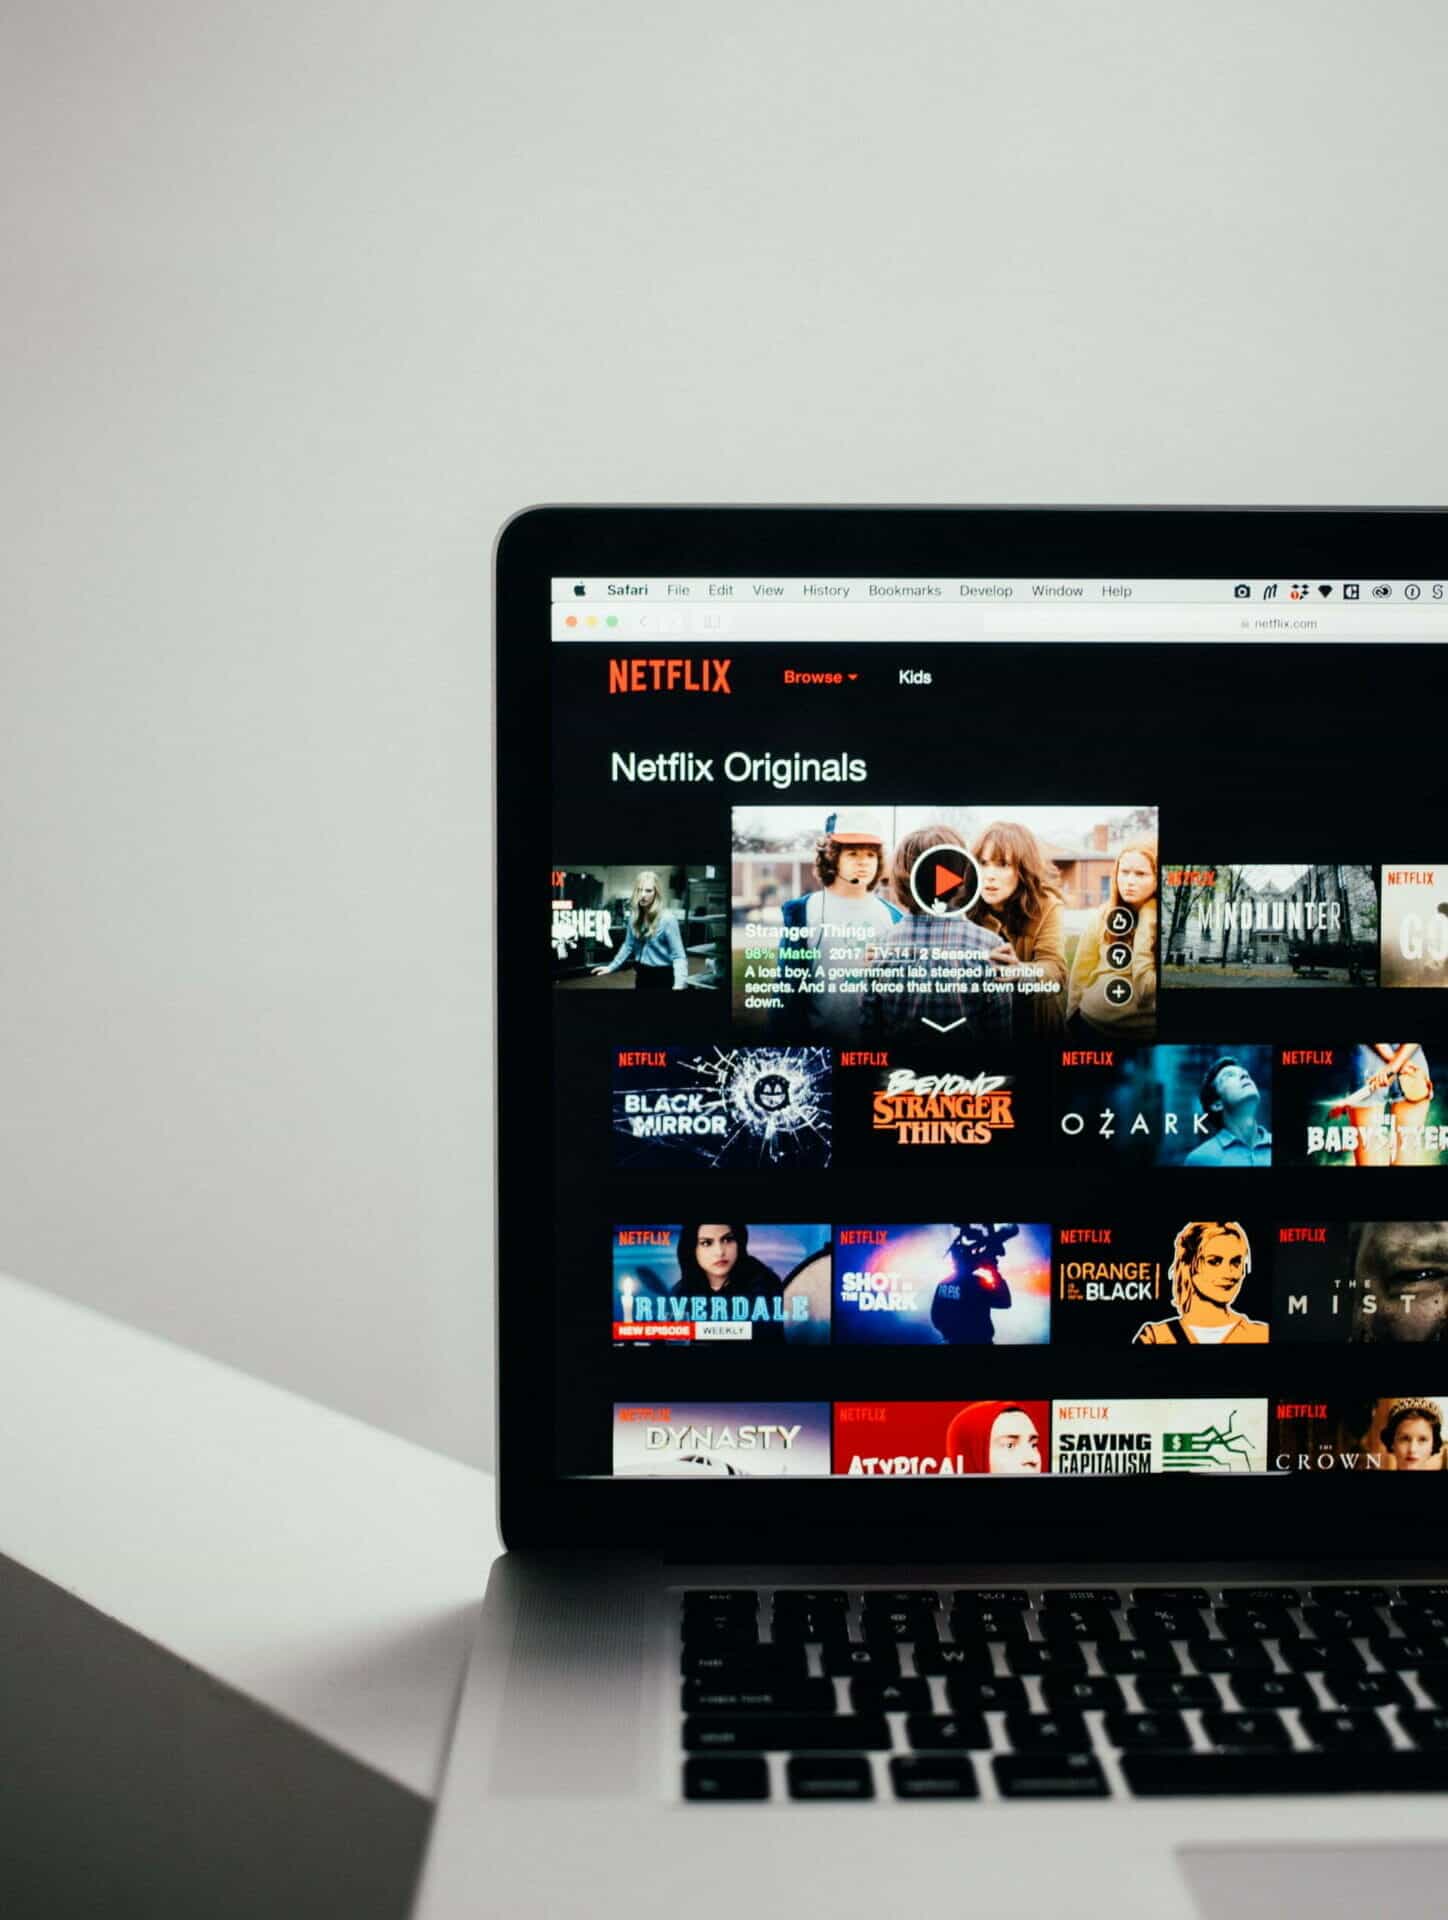 Netflix – What do you know about series and movies?